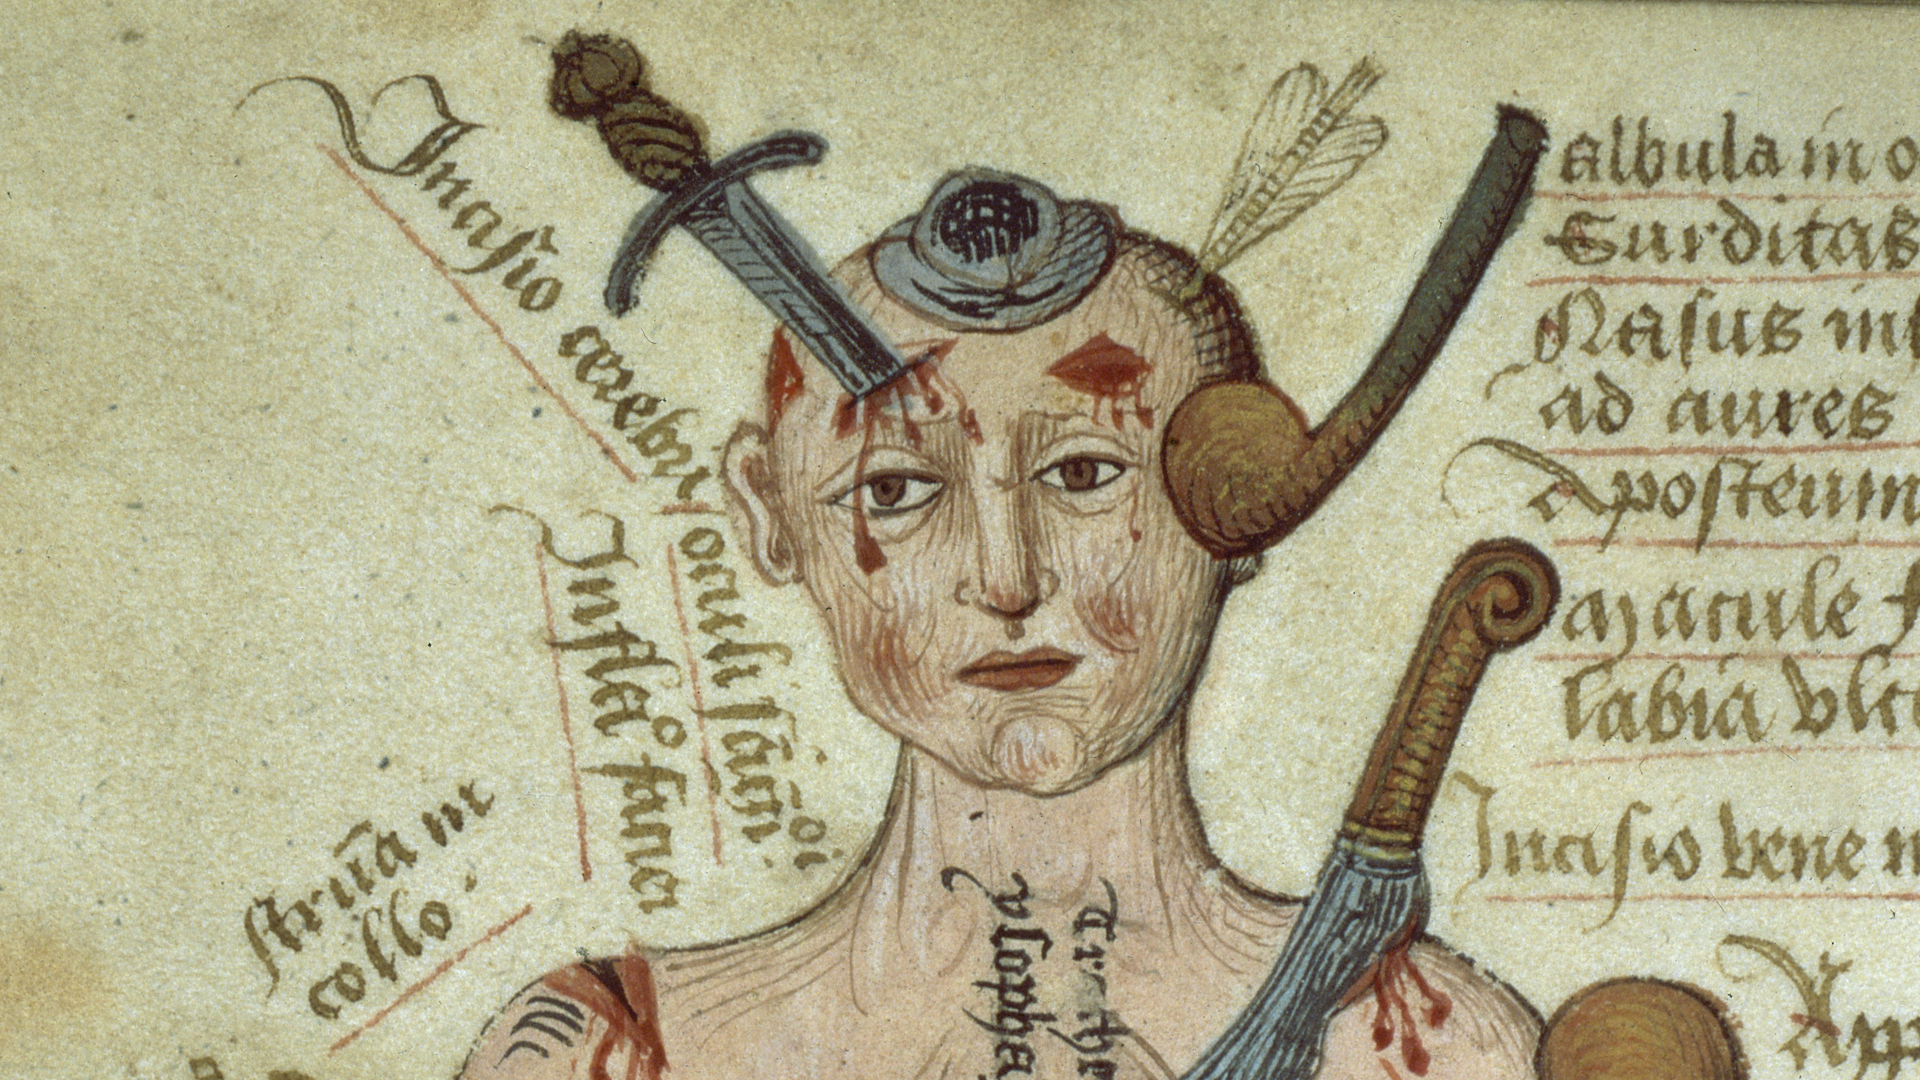 An illustration of a male human head with various wounds and weapons protruding from him.